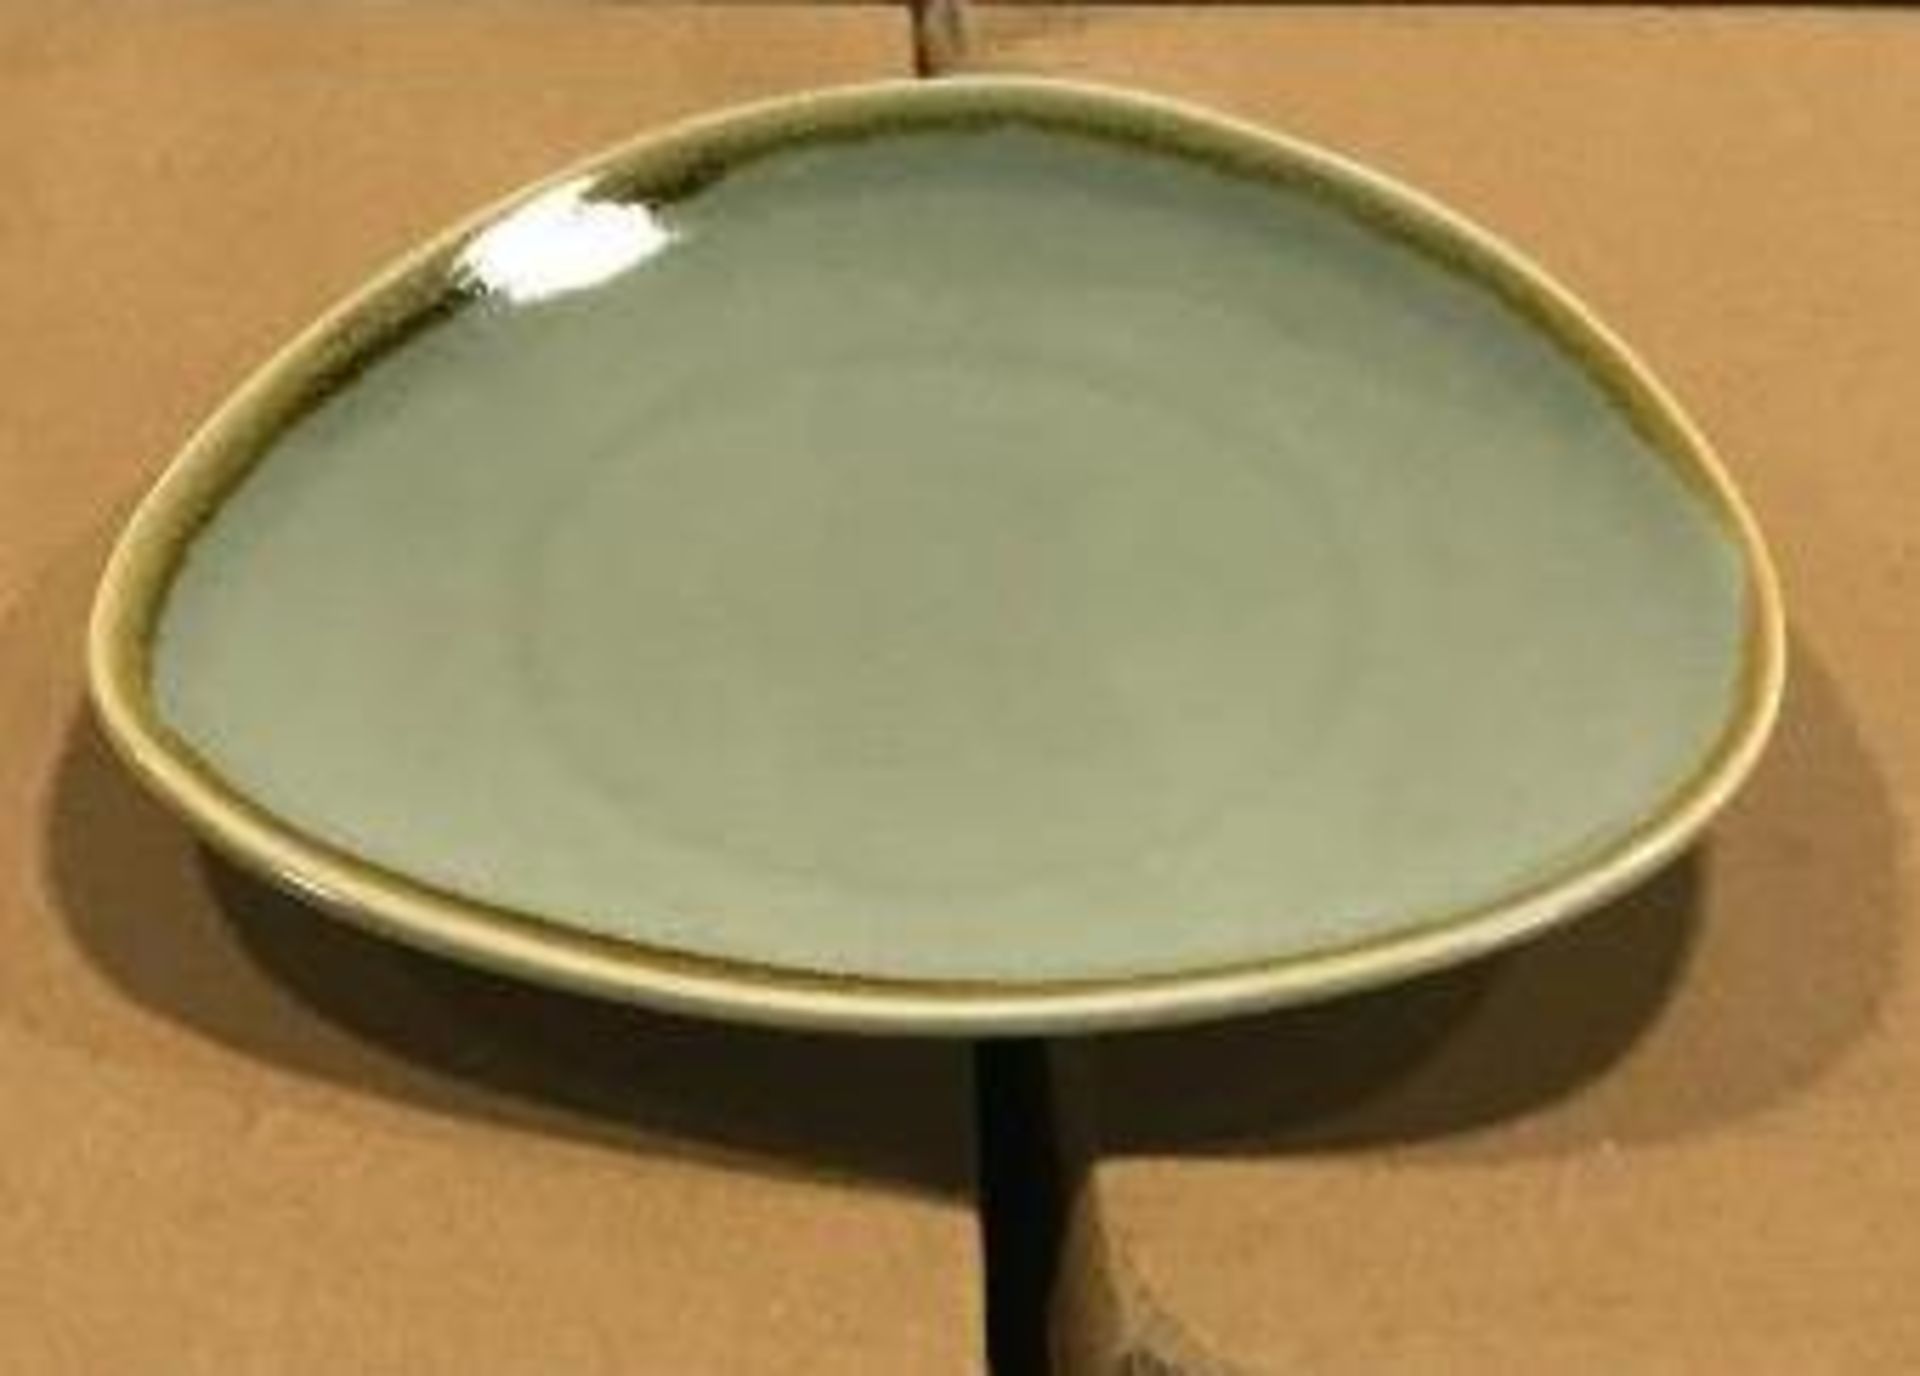 CASE OF TERRASTONE 6 1/2" SAGE GREEN PLATE - 36/CASE, ARCOROC - NEW - Image 3 of 3